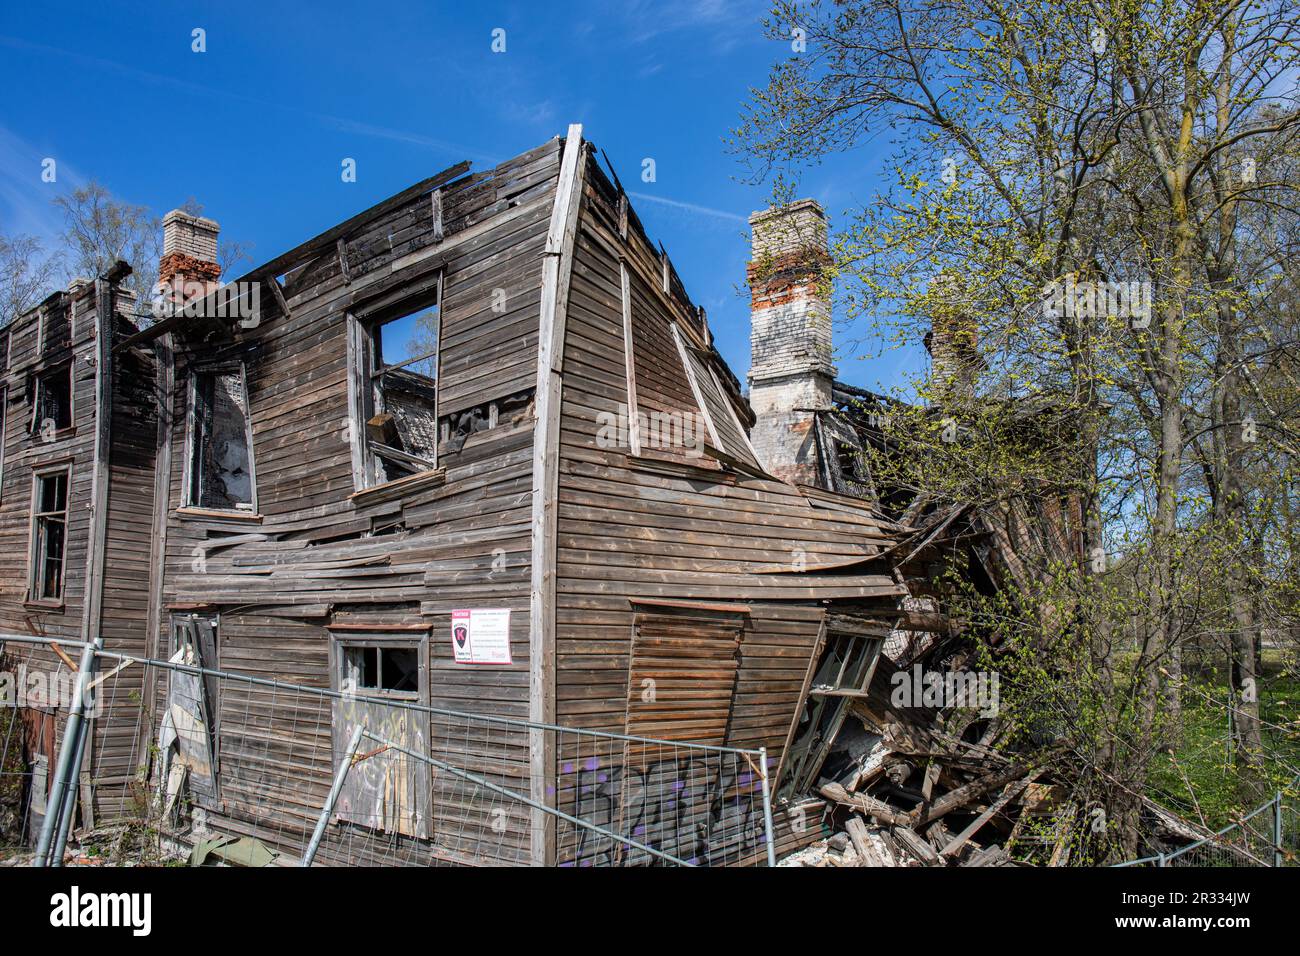 Partly burnt and collapsed wooden residential building on a sunny spring day in Kopli district of Tallinn, Estonia Stock Photo